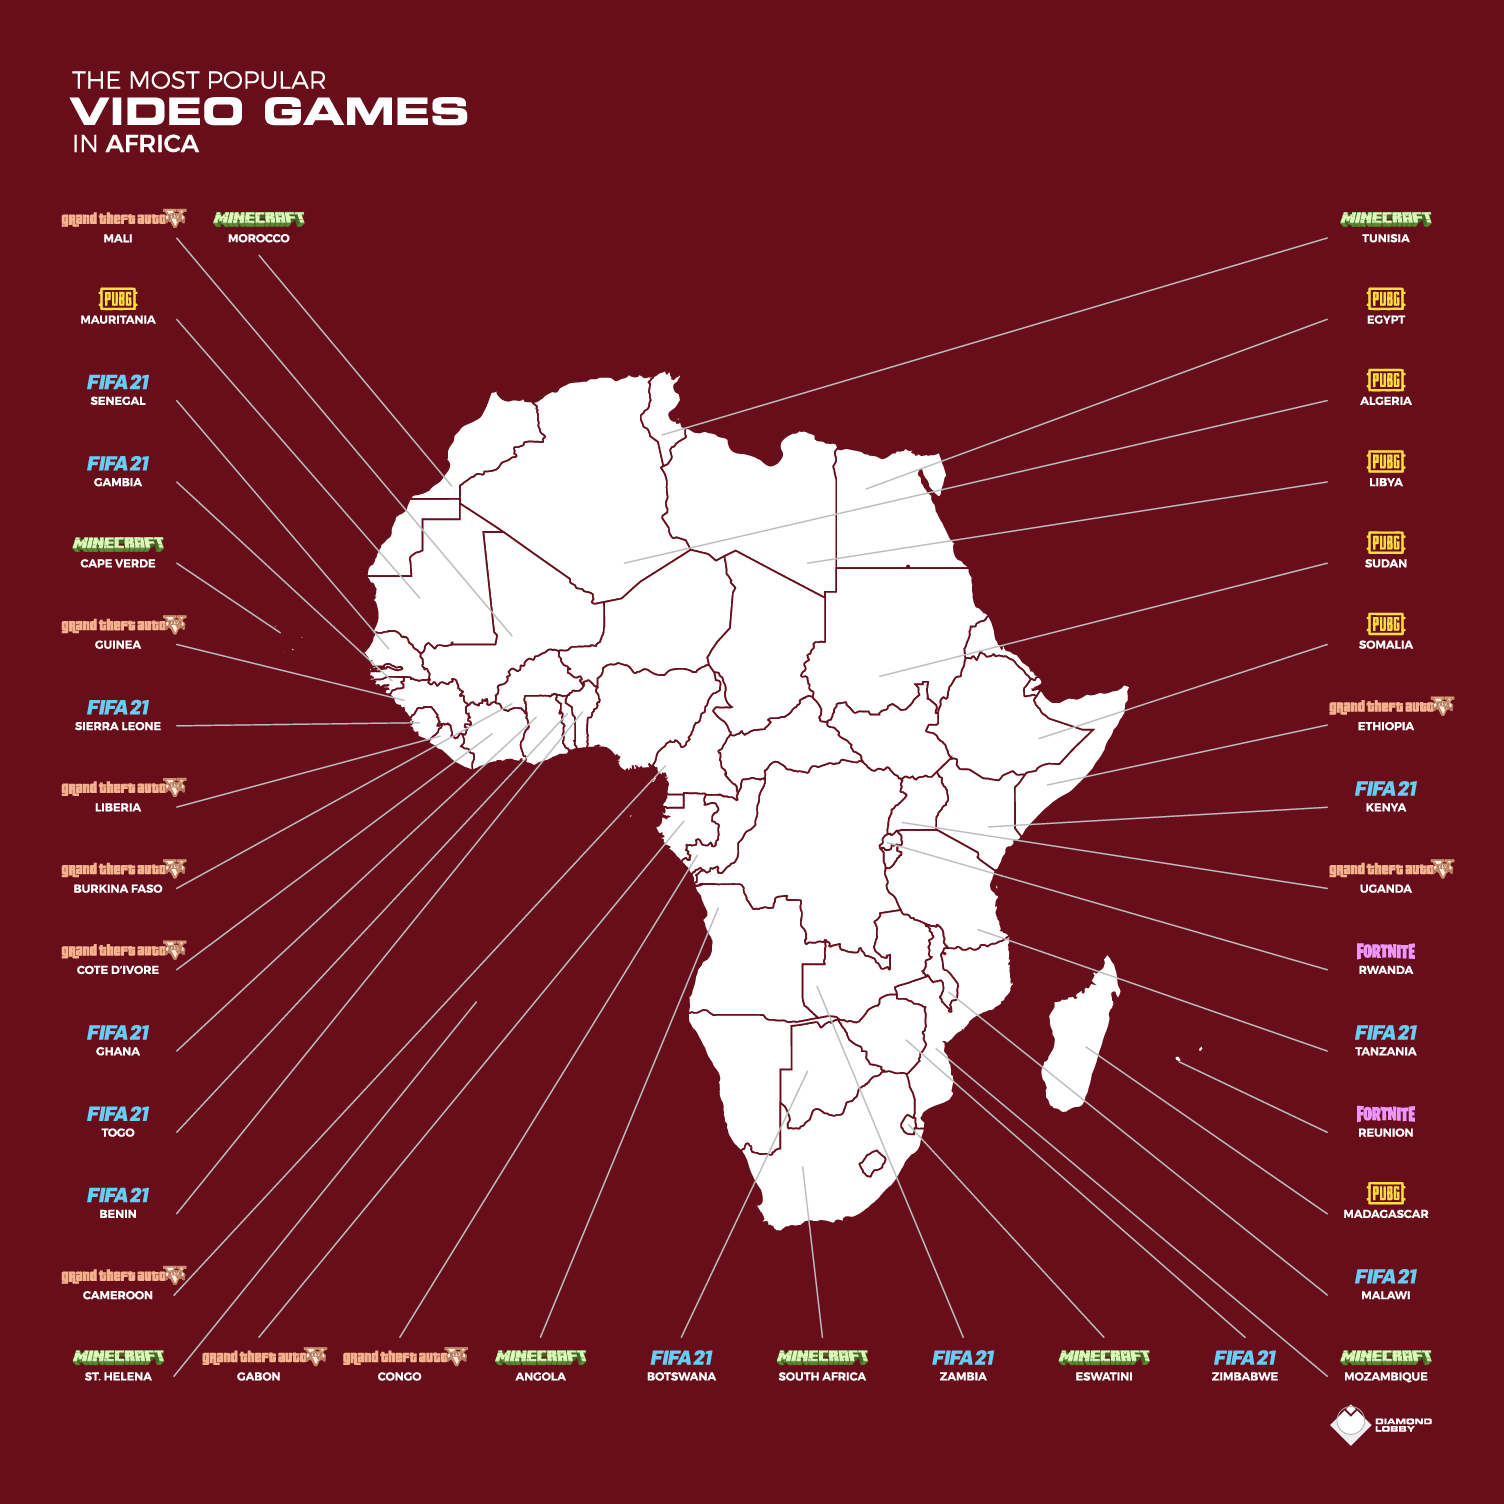 A map showing the most popular games in Africa with each country labeled.